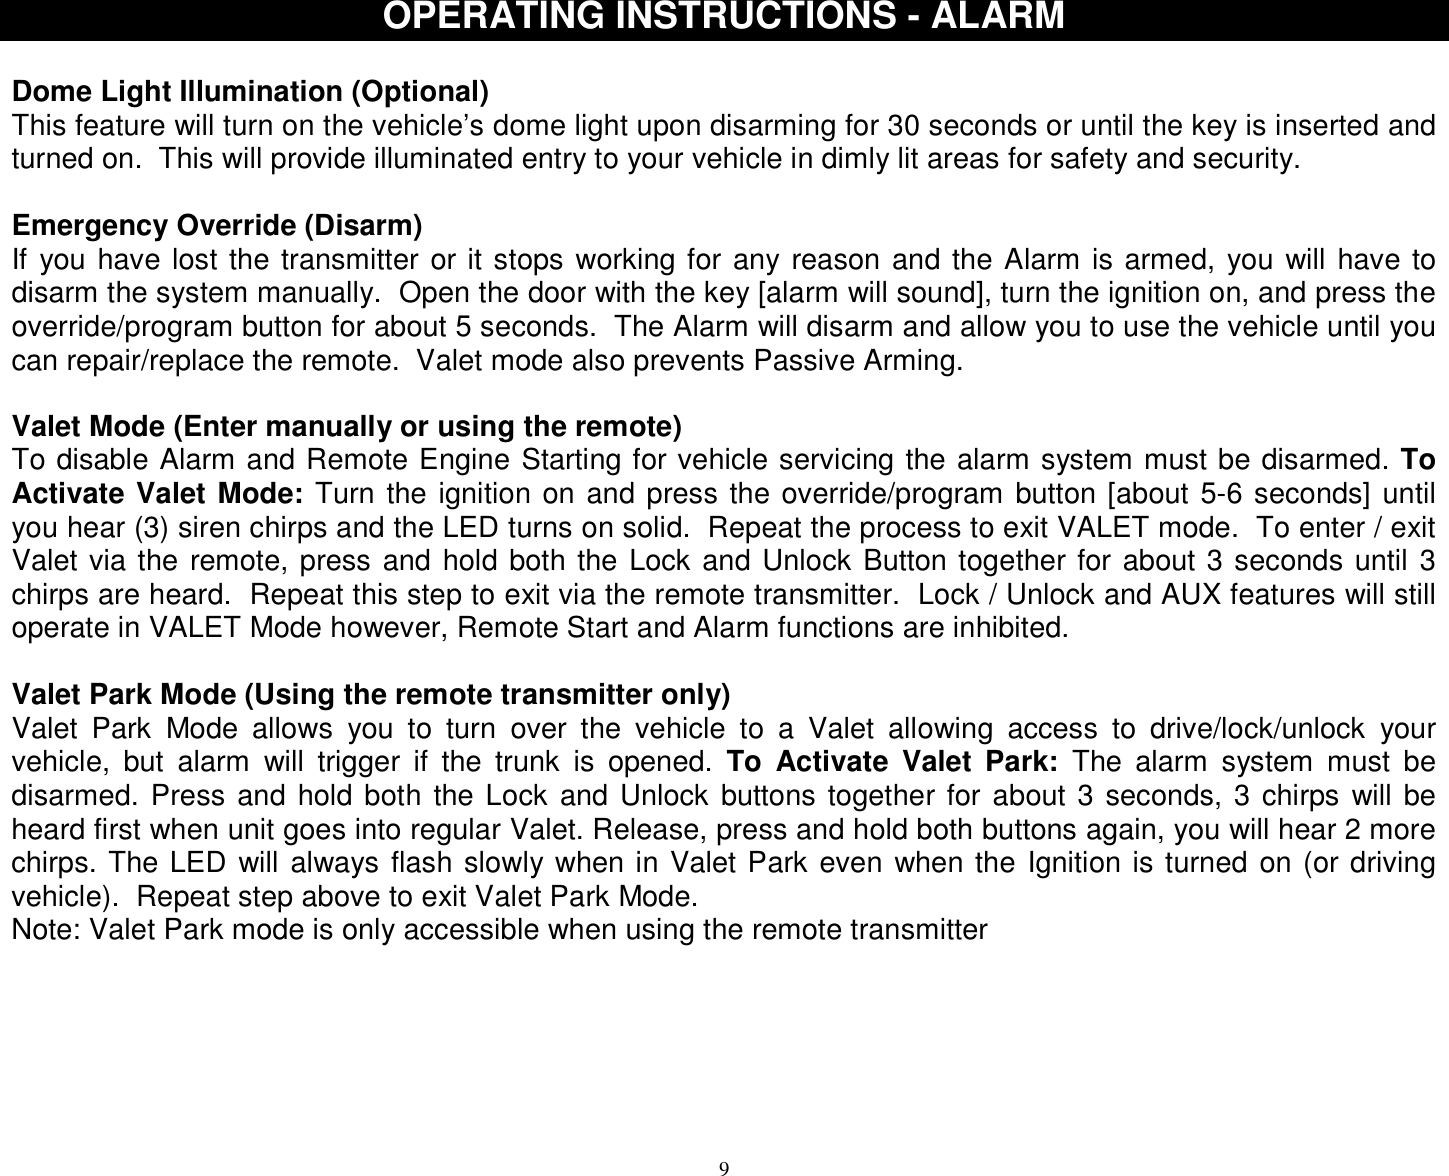  9OPERATING INSTRUCTIONS - ALARM  Dome Light Illumination (Optional) This feature will turn on the vehicle’s dome light upon disarming for 30 seconds or until the key is inserted and turned on.  This will provide illuminated entry to your vehicle in dimly lit areas for safety and security.  Emergency Override (Disarm) If you have lost the transmitter or it stops working for any reason and the Alarm is armed, you will have to disarm the system manually.  Open the door with the key [alarm will sound], turn the ignition on, and press the override/program button for about 5 seconds.  The Alarm will disarm and allow you to use the vehicle until you can repair/replace the remote.  Valet mode also prevents Passive Arming.  Valet Mode (Enter manually or using the remote) To disable Alarm and Remote Engine Starting for vehicle servicing the alarm system must be disarmed. To Activate Valet Mode: Turn the ignition on and press the override/program button [about 5-6 seconds] until you hear (3) siren chirps and the LED turns on solid.  Repeat the process to exit VALET mode.  To enter / exit Valet via the remote, press and hold both the Lock and Unlock Button together for about 3 seconds until 3 chirps are heard.  Repeat this step to exit via the remote transmitter.  Lock / Unlock and AUX features will still operate in VALET Mode however, Remote Start and Alarm functions are inhibited.  Valet Park Mode (Using the remote transmitter only) Valet Park Mode allows you to turn over the vehicle to a Valet allowing access to drive/lock/unlock your vehicle, but alarm will trigger if the trunk is opened.  To Activate Valet Park: The alarm system must be disarmed. Press and hold both the Lock and Unlock buttons together for about 3 seconds, 3 chirps will be heard first when unit goes into regular Valet. Release, press and hold both buttons again, you will hear 2 more chirps. The LED will always flash slowly when in Valet Park even when the Ignition is turned on (or driving vehicle).  Repeat step above to exit Valet Park Mode. Note: Valet Park mode is only accessible when using the remote transmitter        